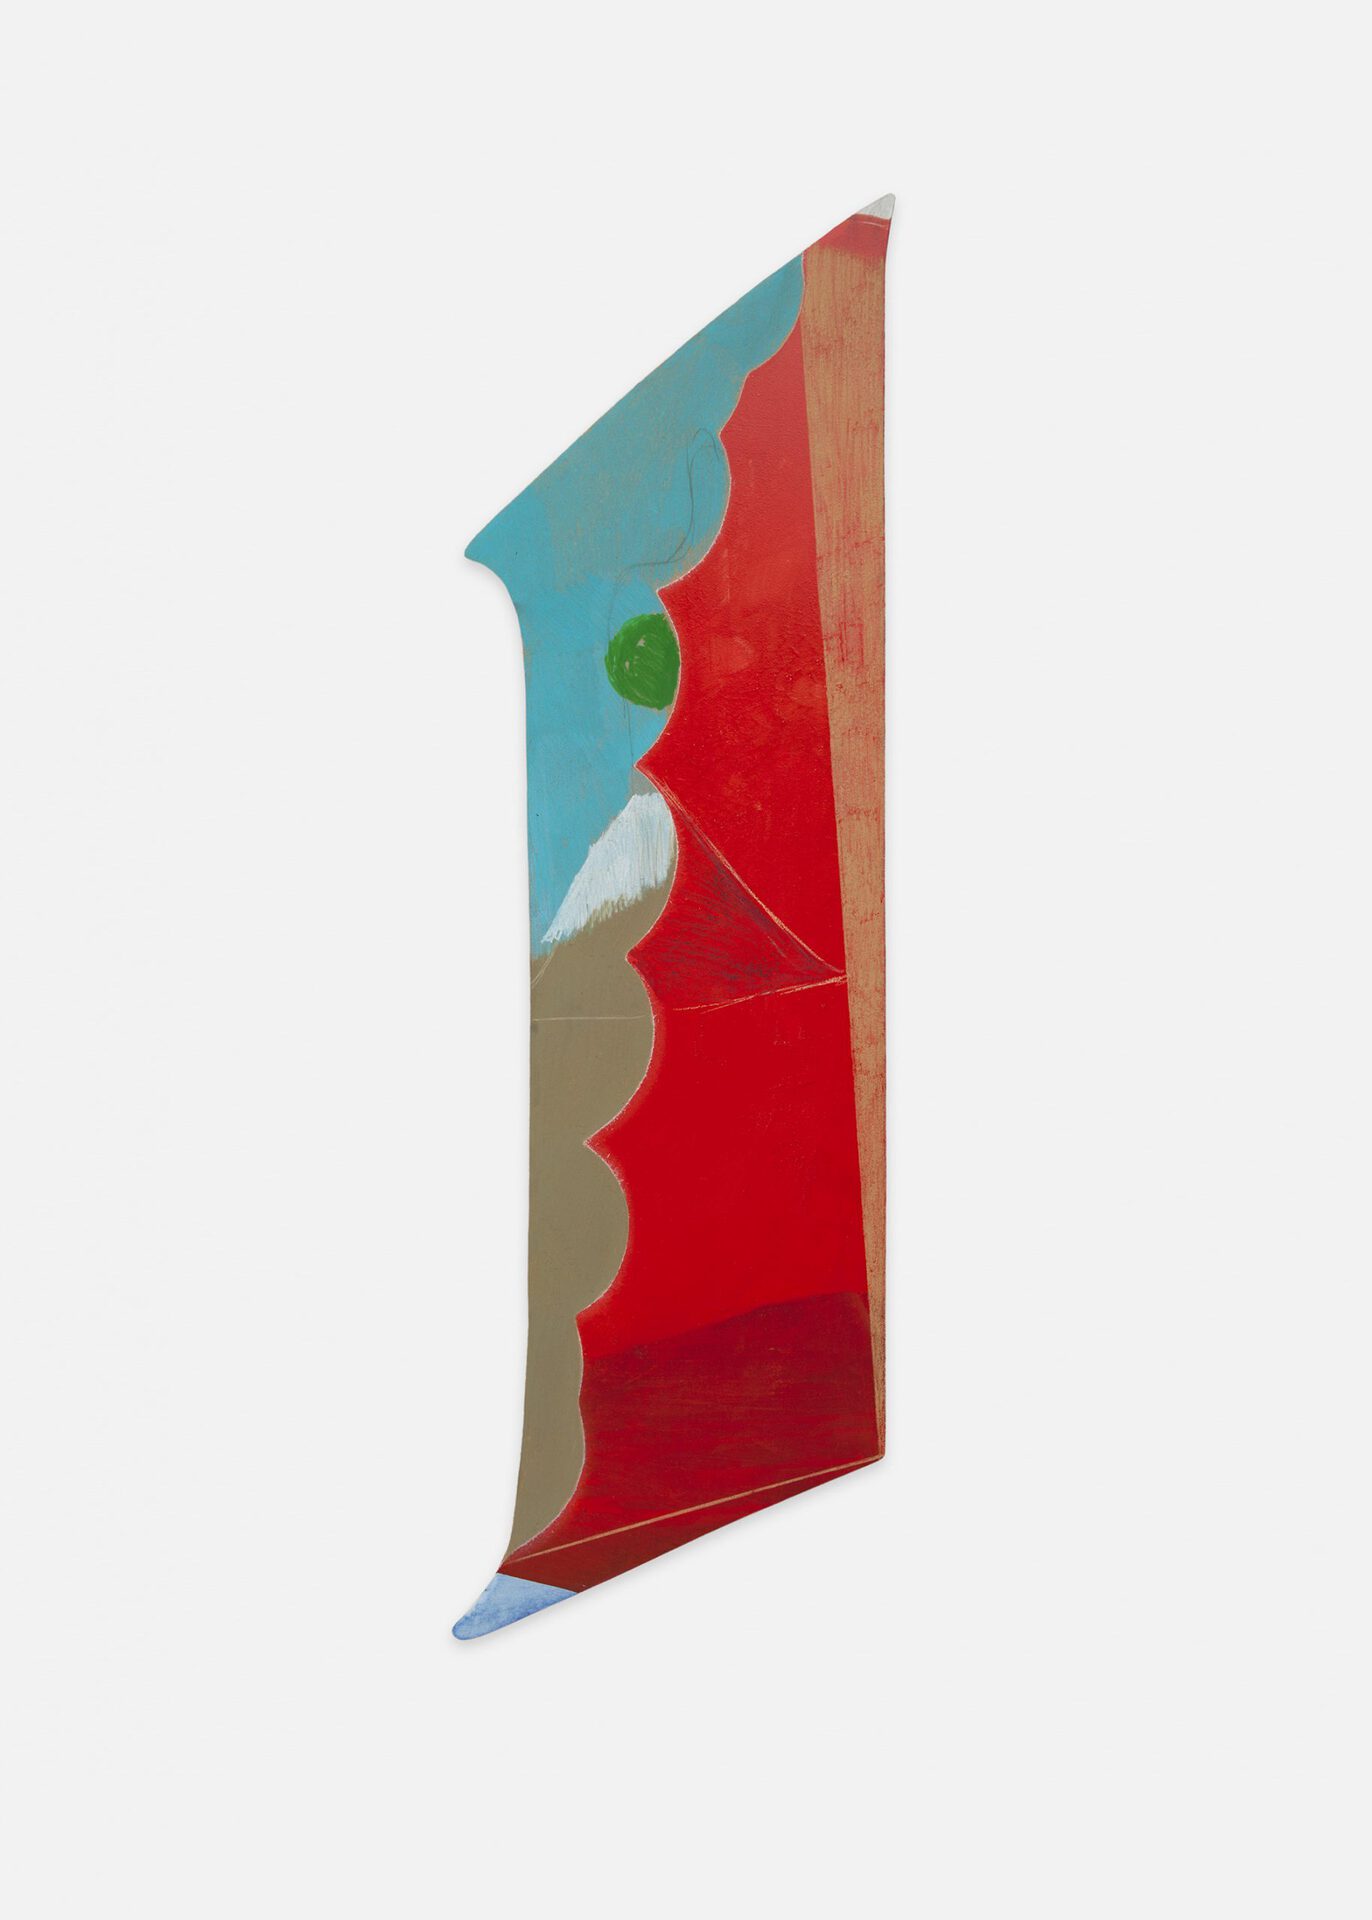 Ralph Schuster, Bat Spring, 2021, wood stain, colored pencil and acrylic pigments on wood, 96 x 31 cm